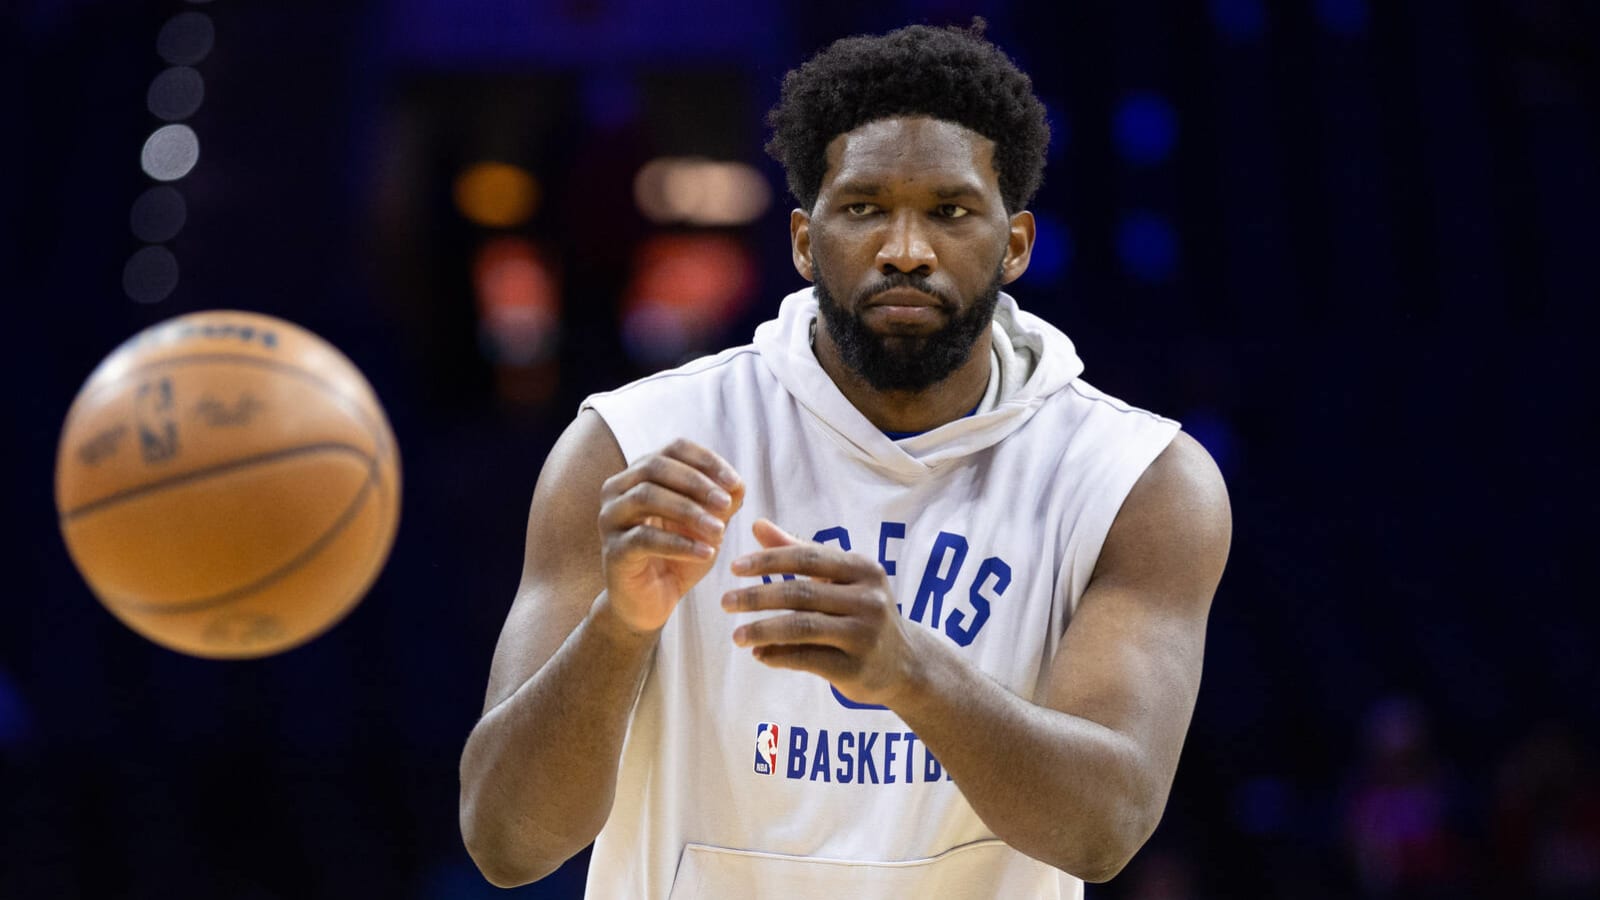 Joel Embiid on MVP chatter: My 'play speaks for itself'